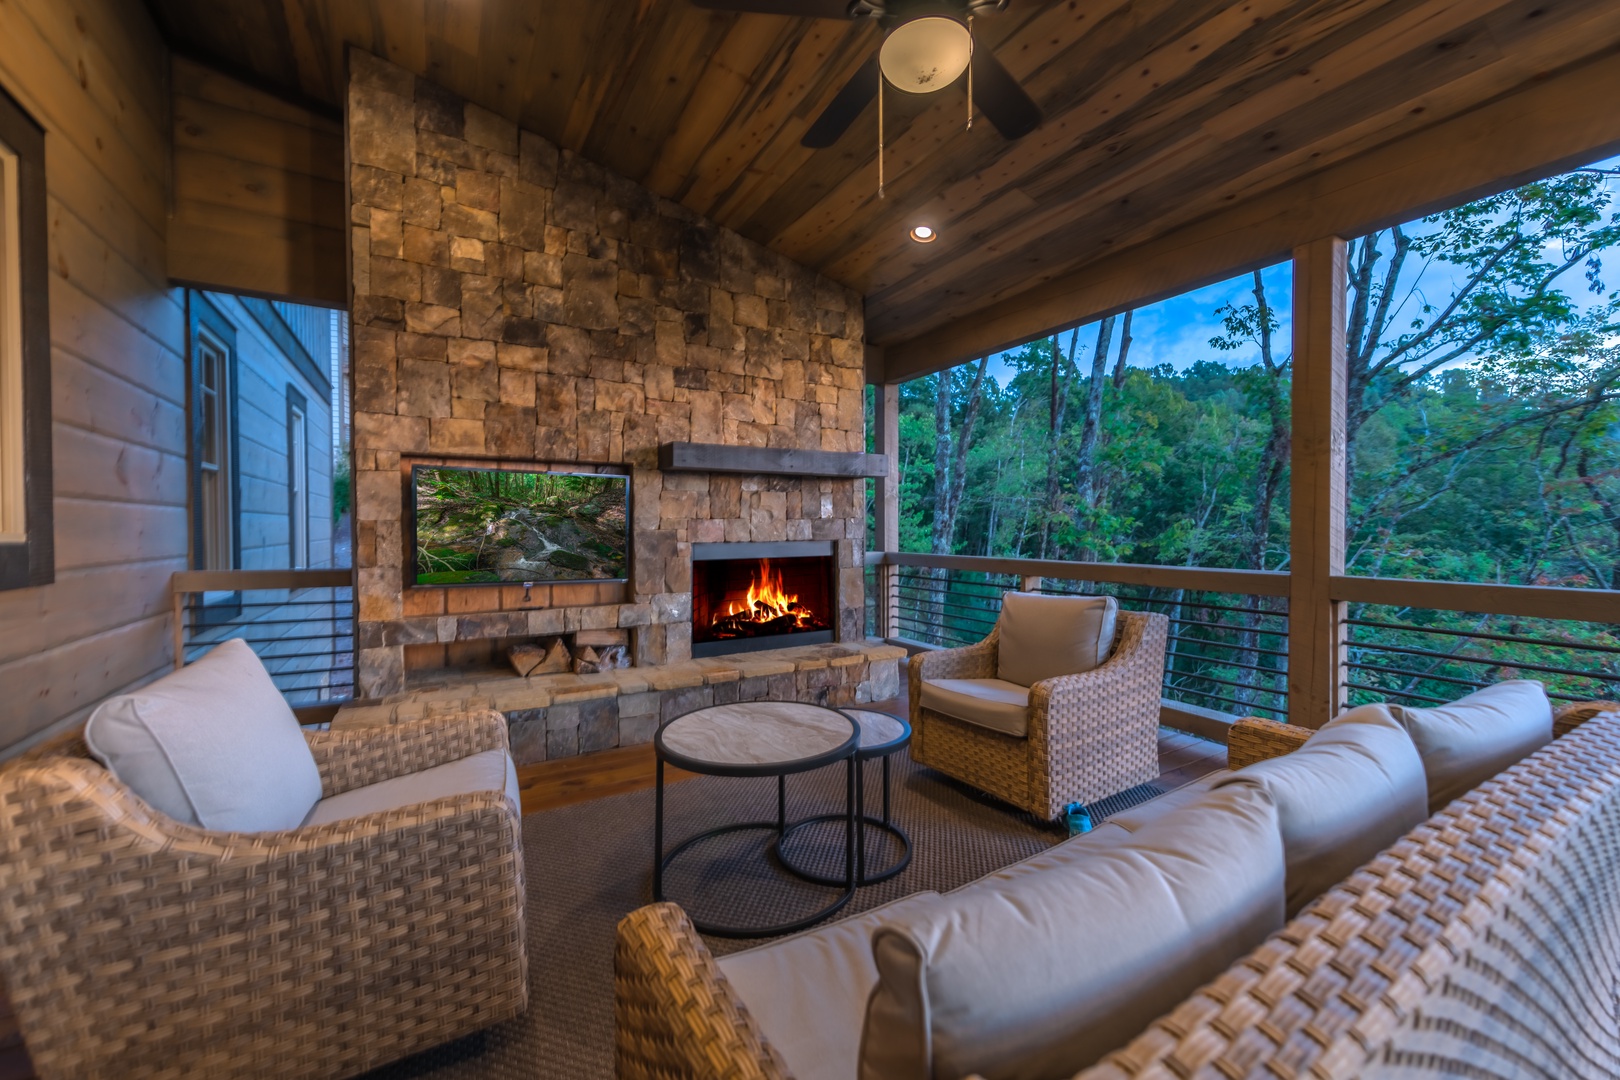 Highland Escape- Deck area with a fireplace and outdoor seating